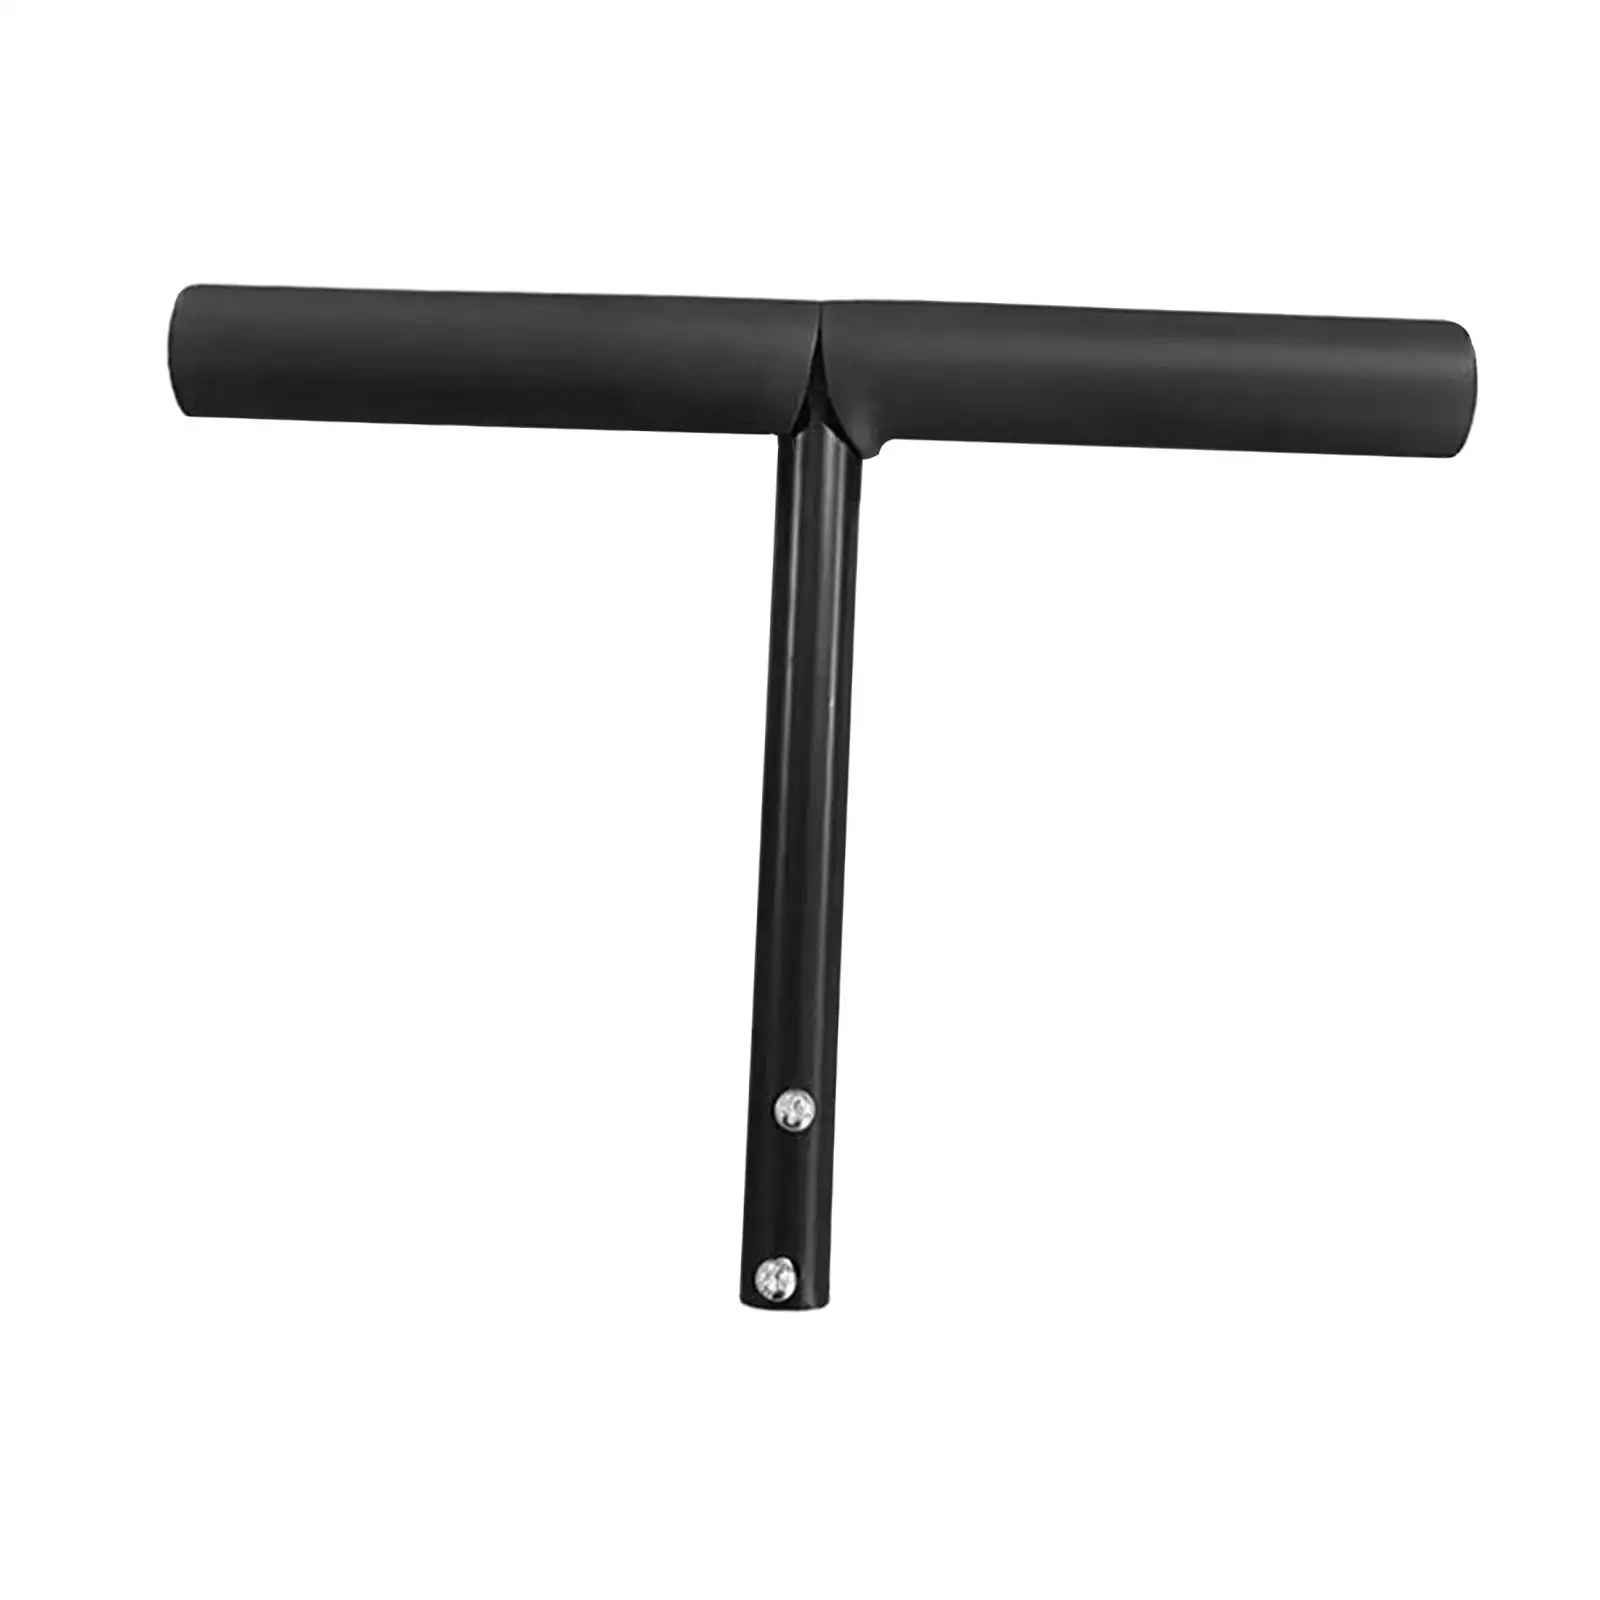 T Shaped Push Handle Bar, Replacement Parts, Sturdy, Kids Tricycle Accessories